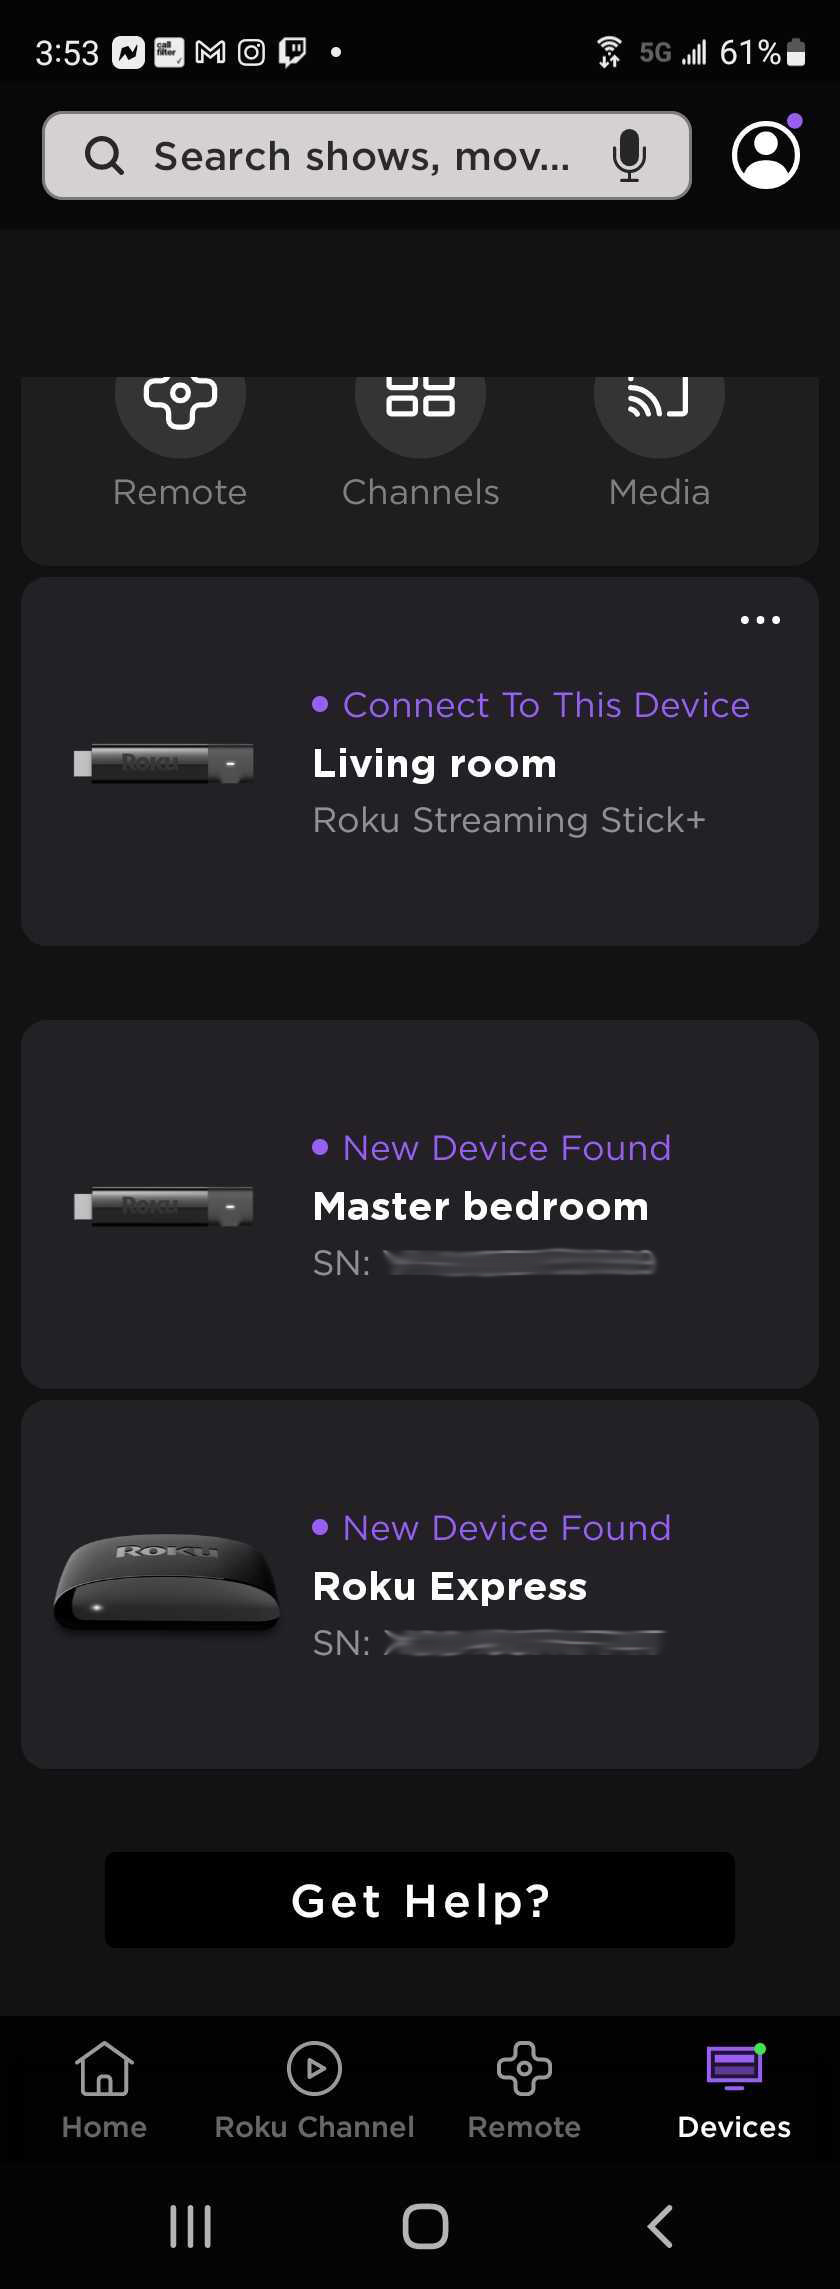 The Devices tab in the Android Roku app